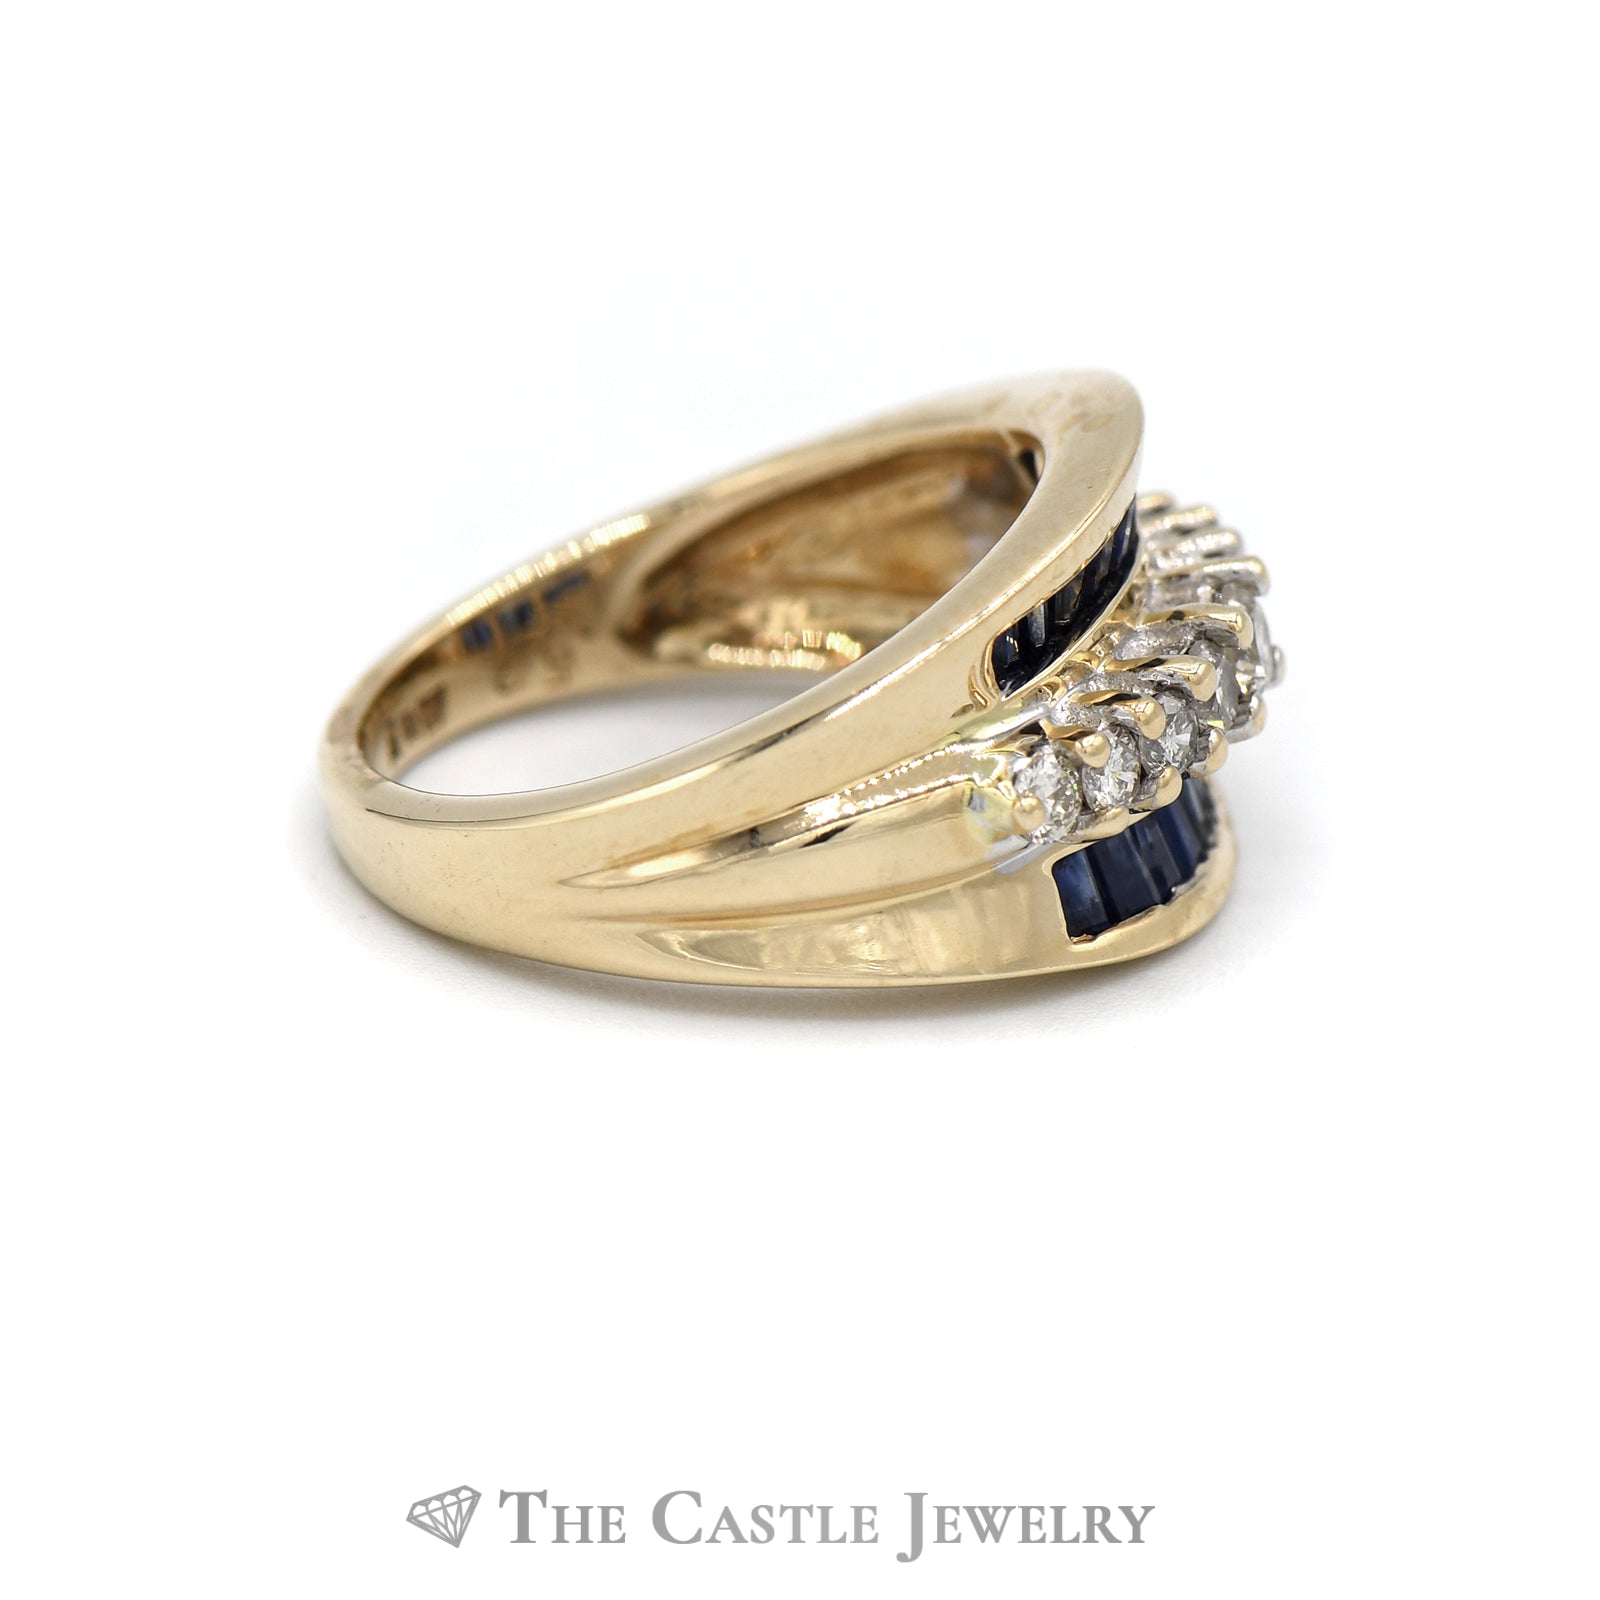 .50CTTW Round Diamond and Baguette Sapphire Concaved Designed Ring in 14KT Yellow Gold